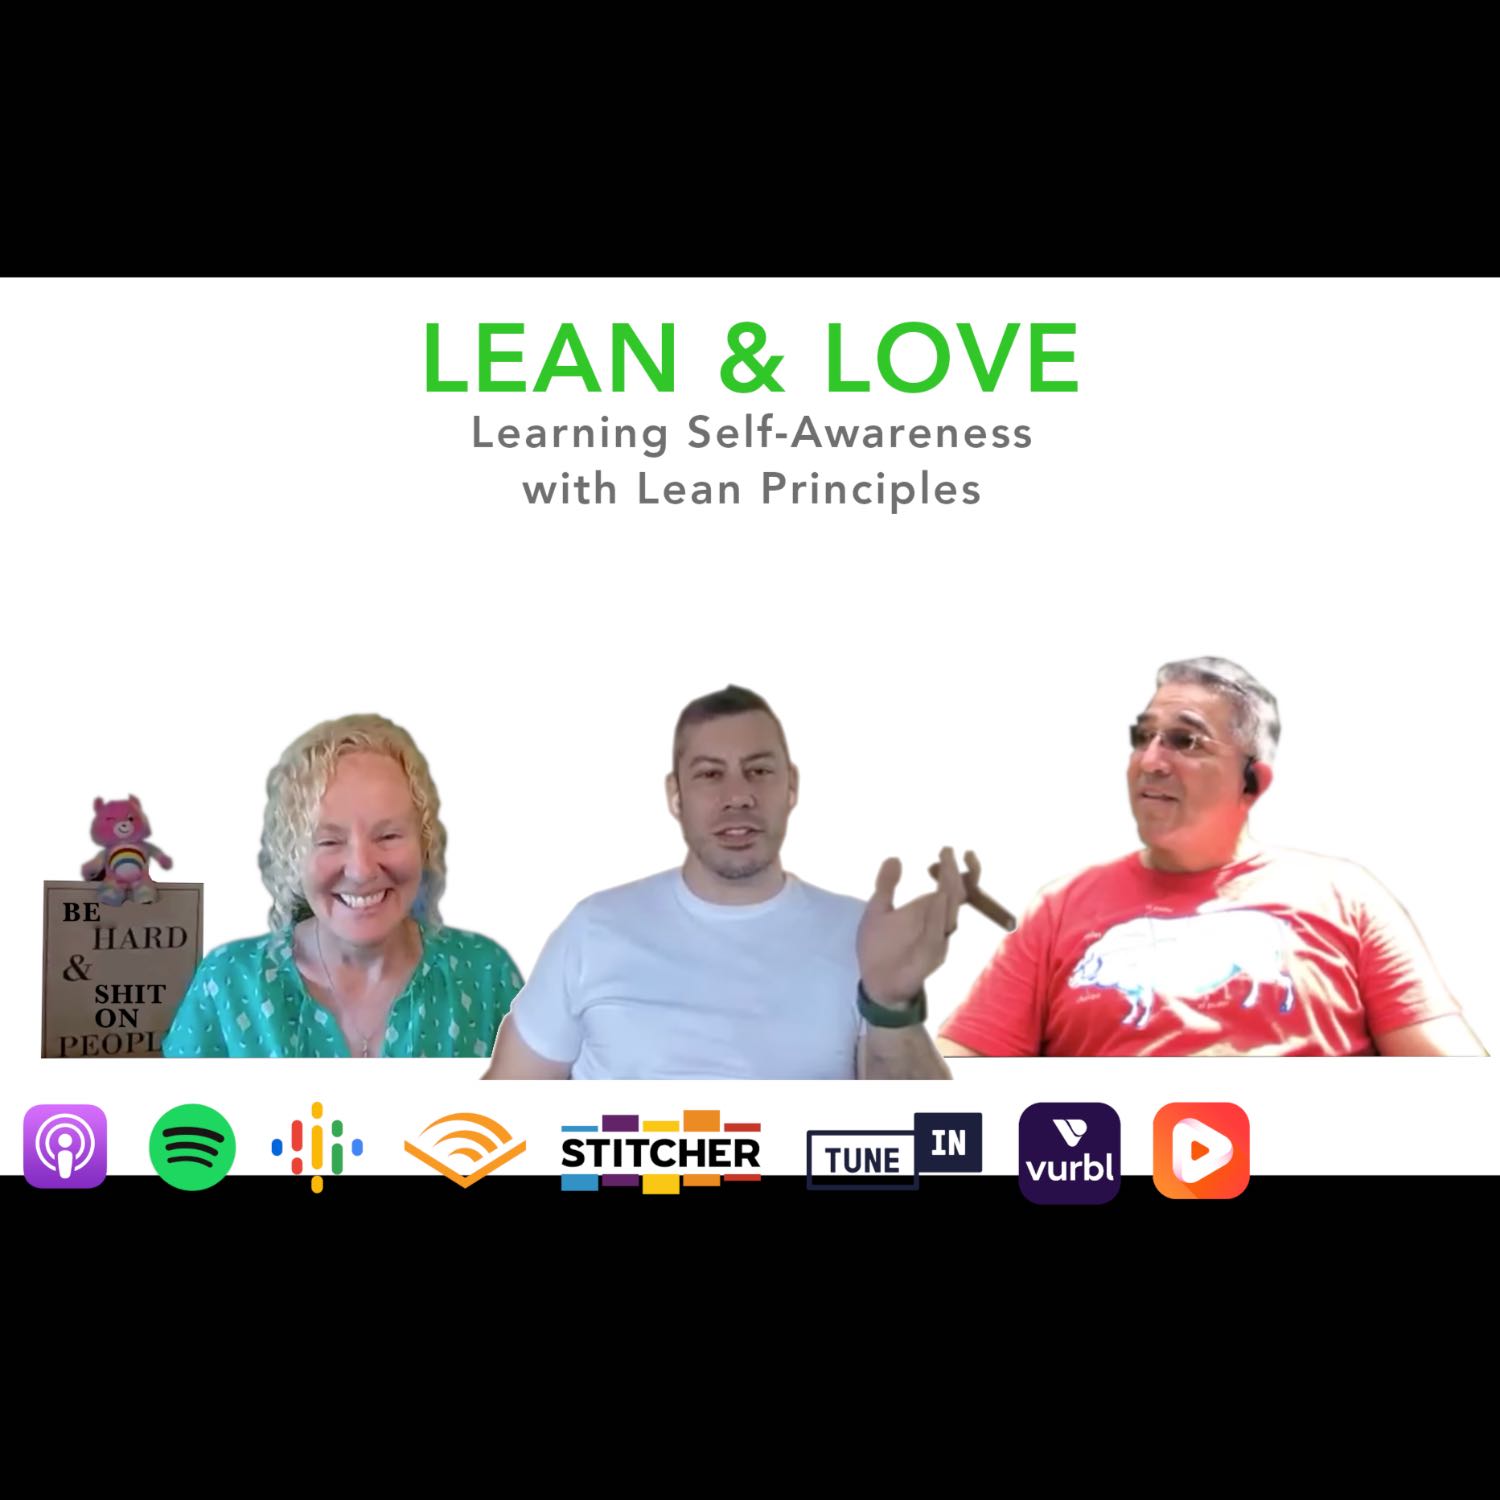 Lean and Love - Learning Self-Awareness with Lean Principles